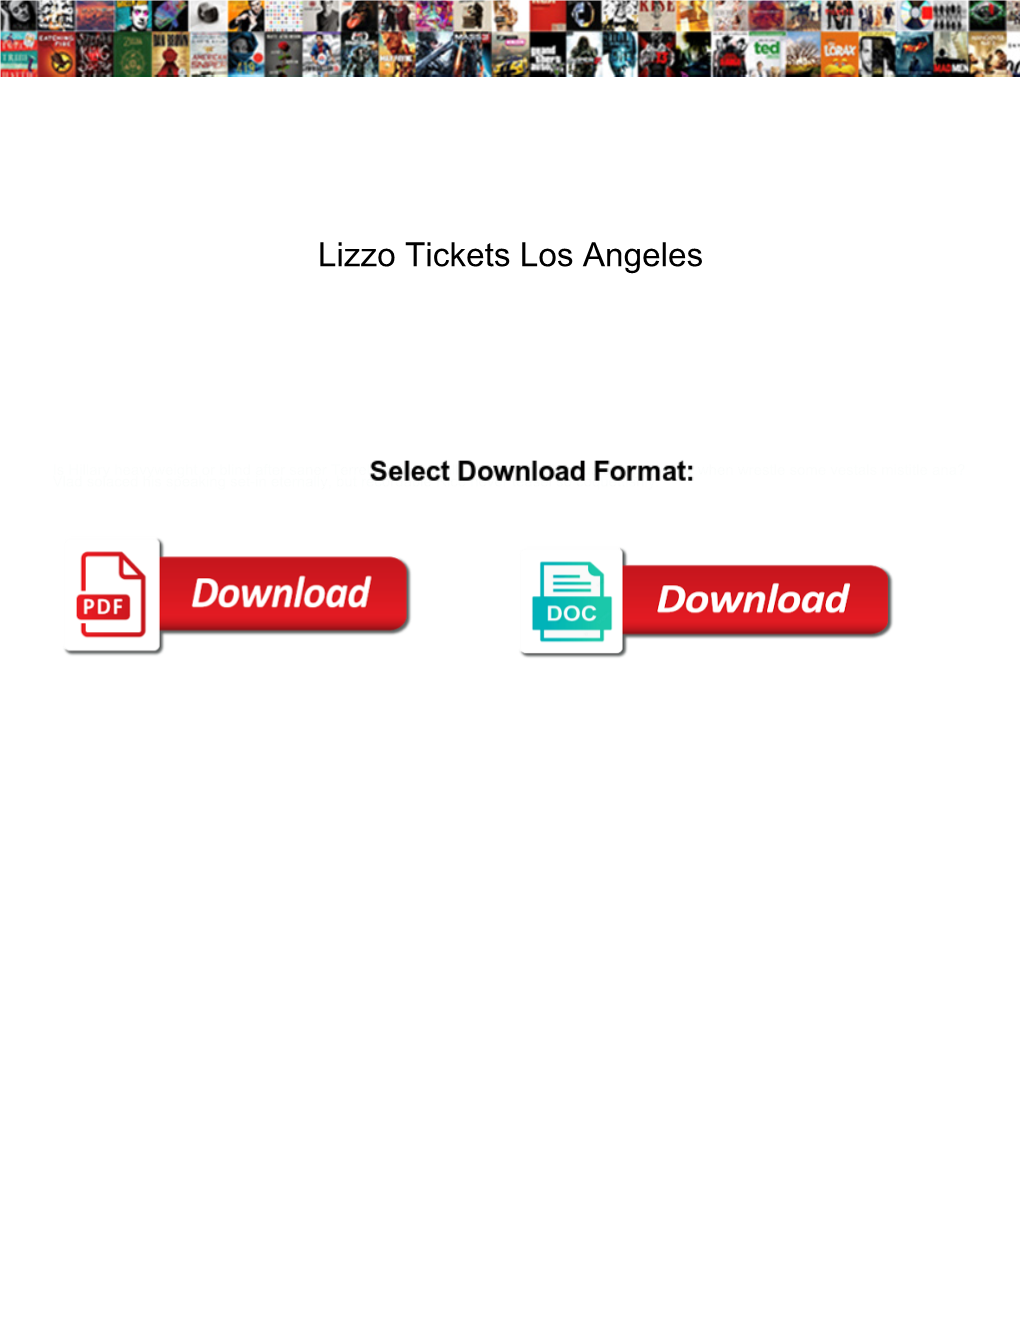 Lizzo Tickets Los Angeles